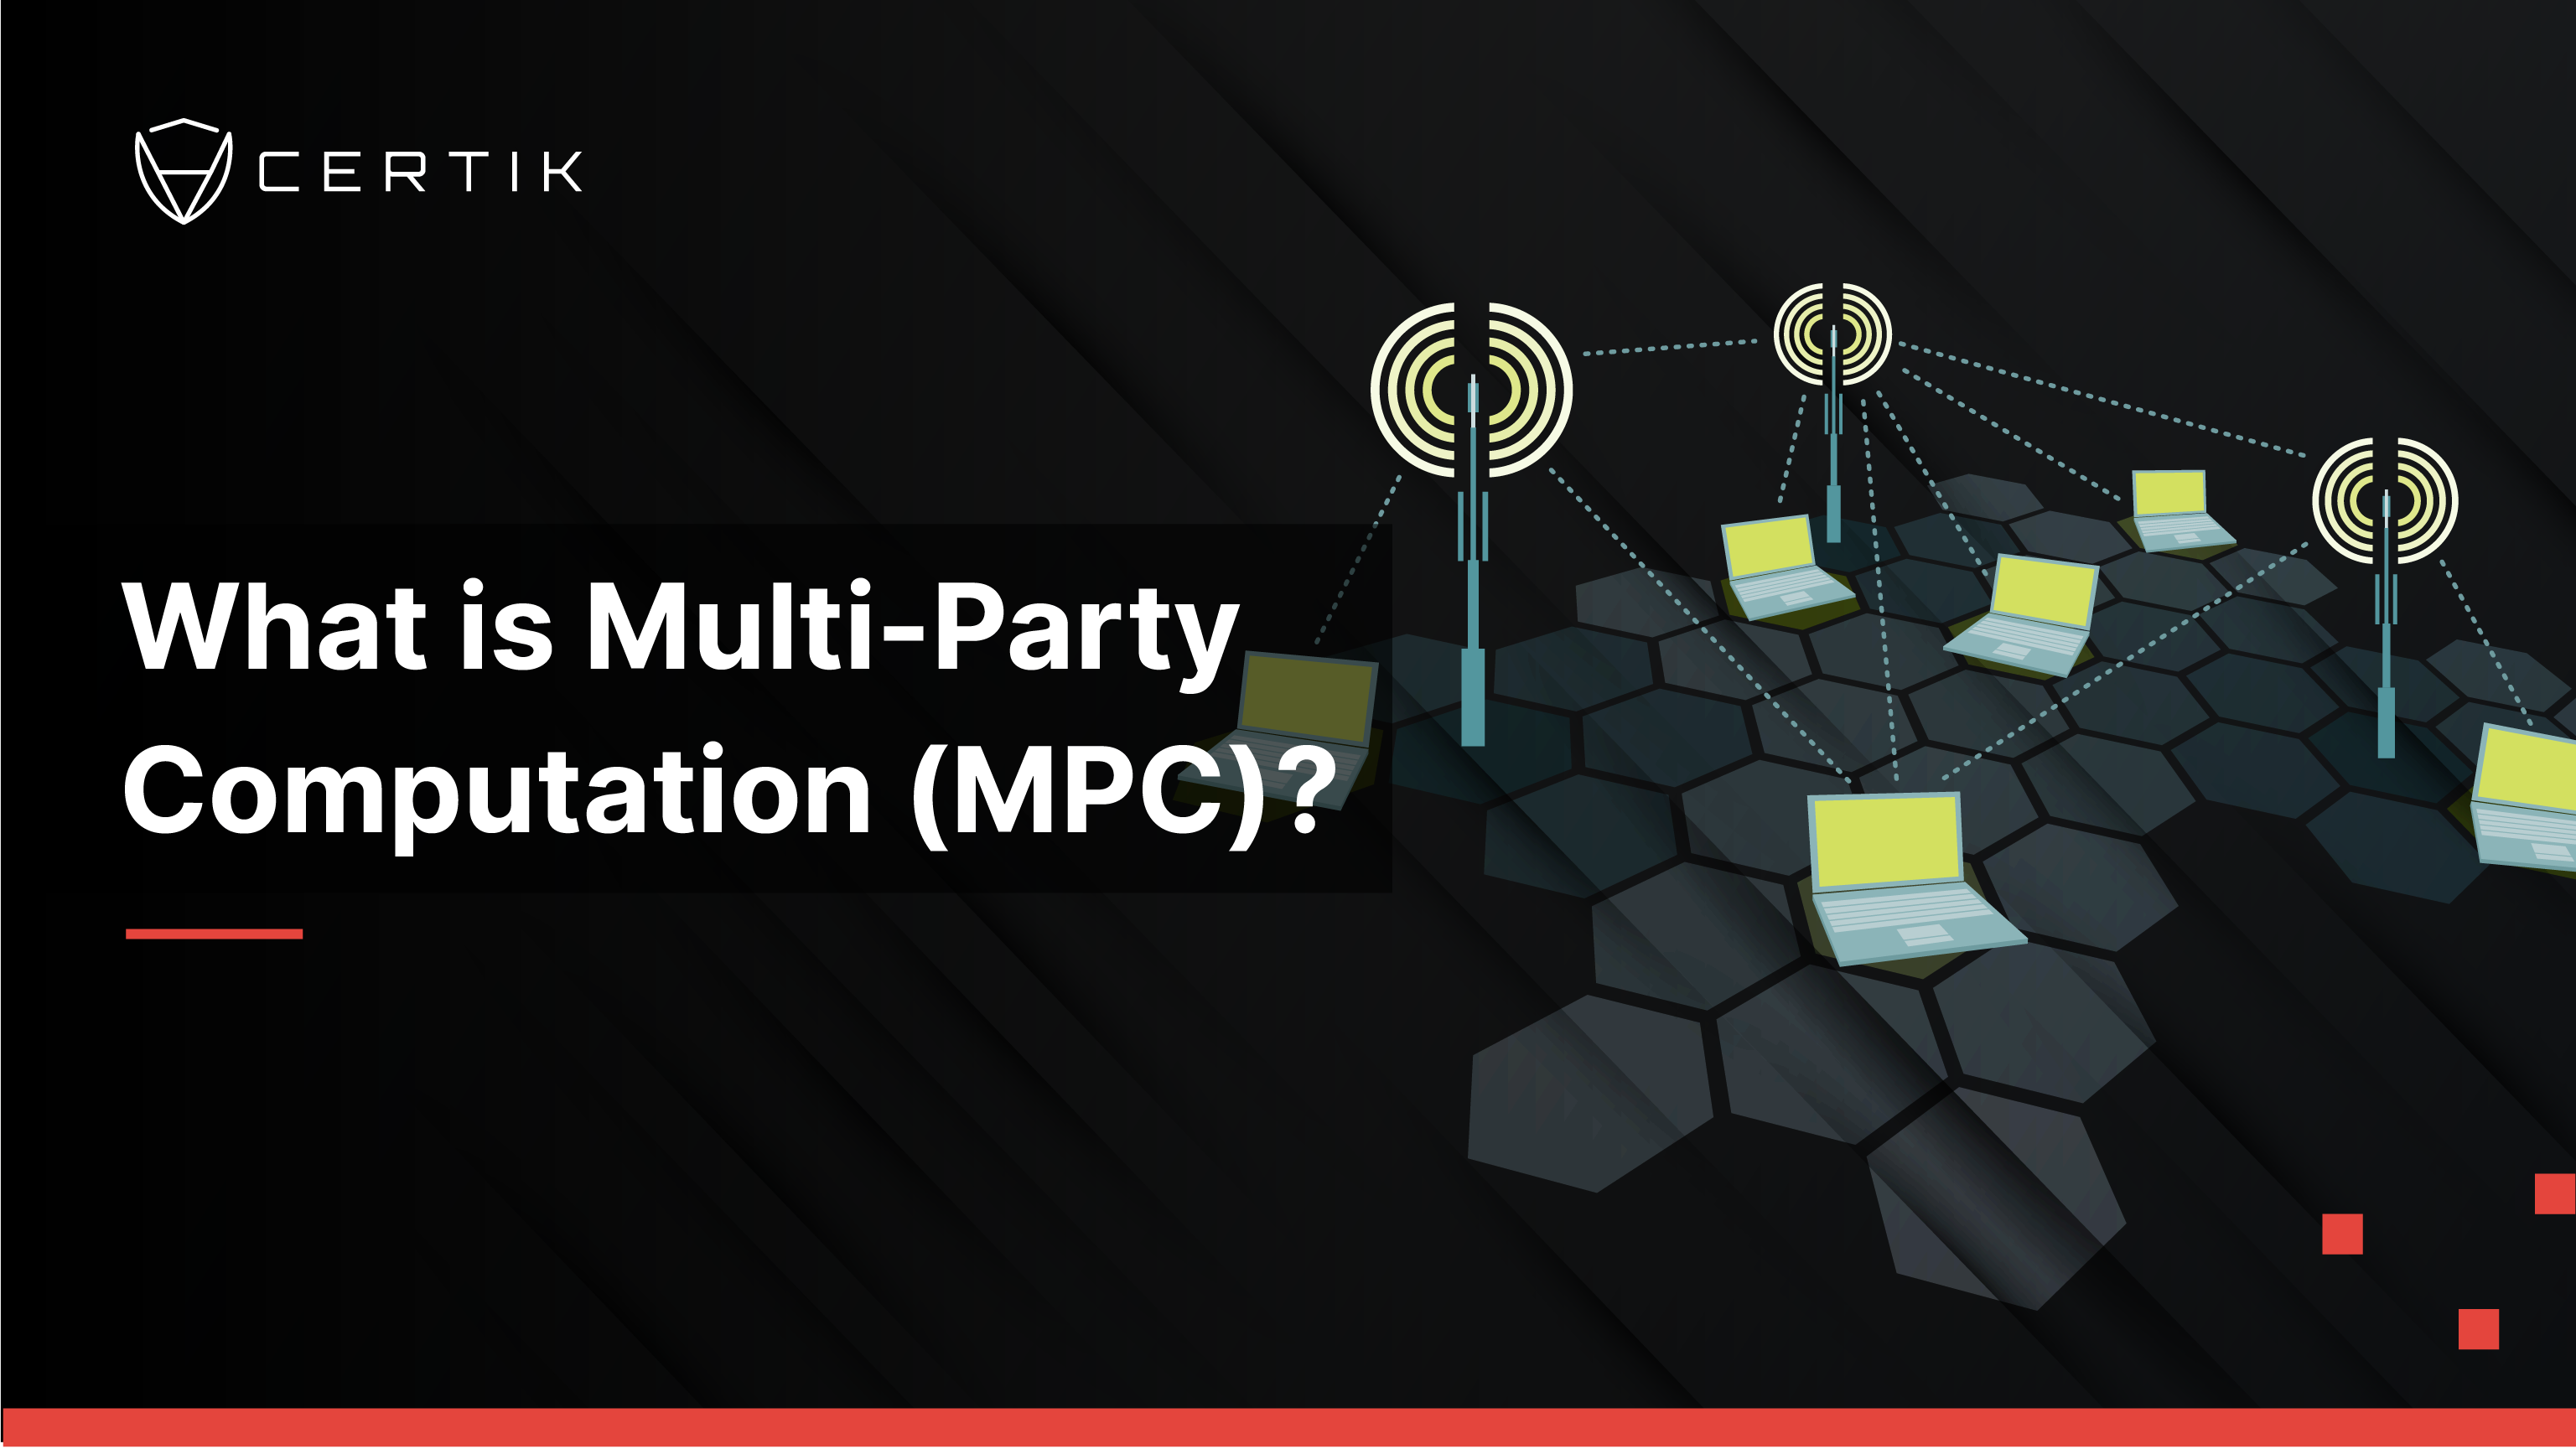 What is Multi-Party Computation (MPC)?